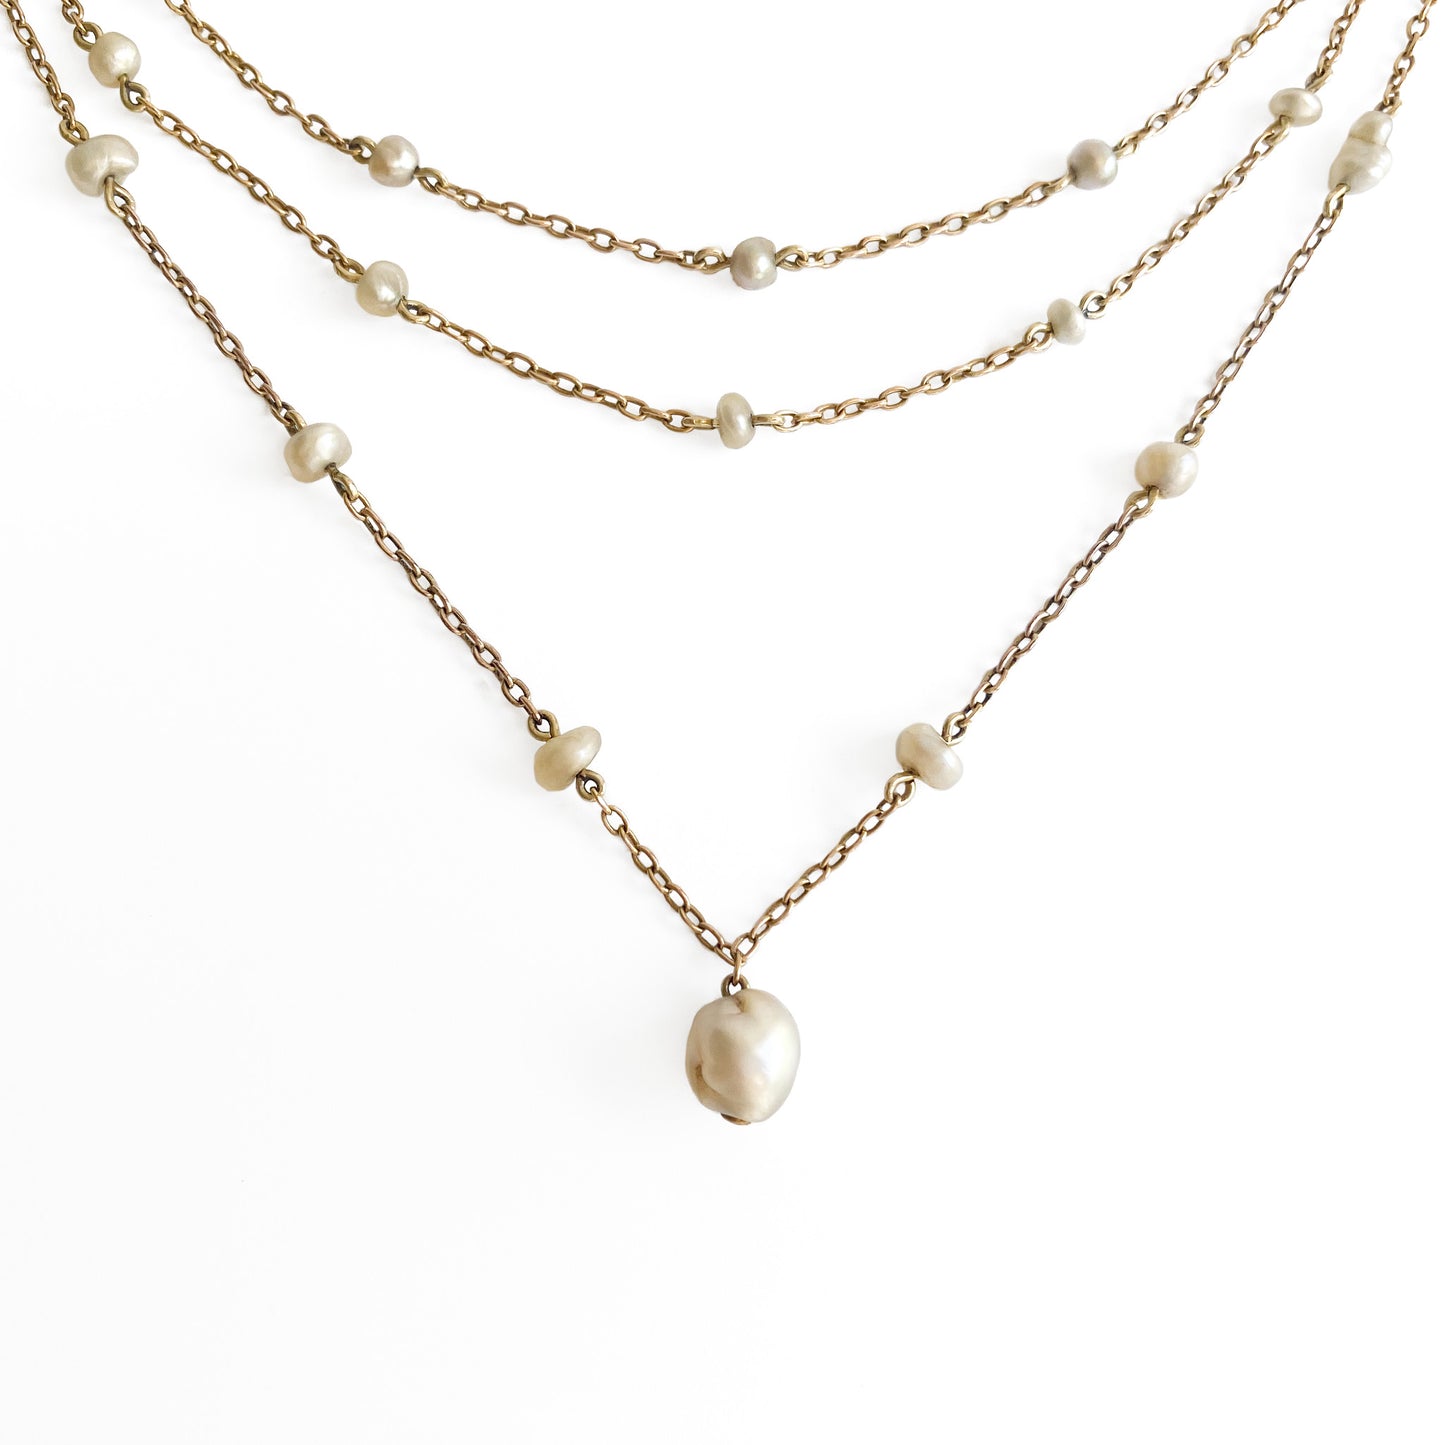 Stunning Edwardian 14ct yellow gold chain interspersed with graduating natural pearls and a larger pearl drop. Clasp attached to safety chain and set with six small seed pearls.